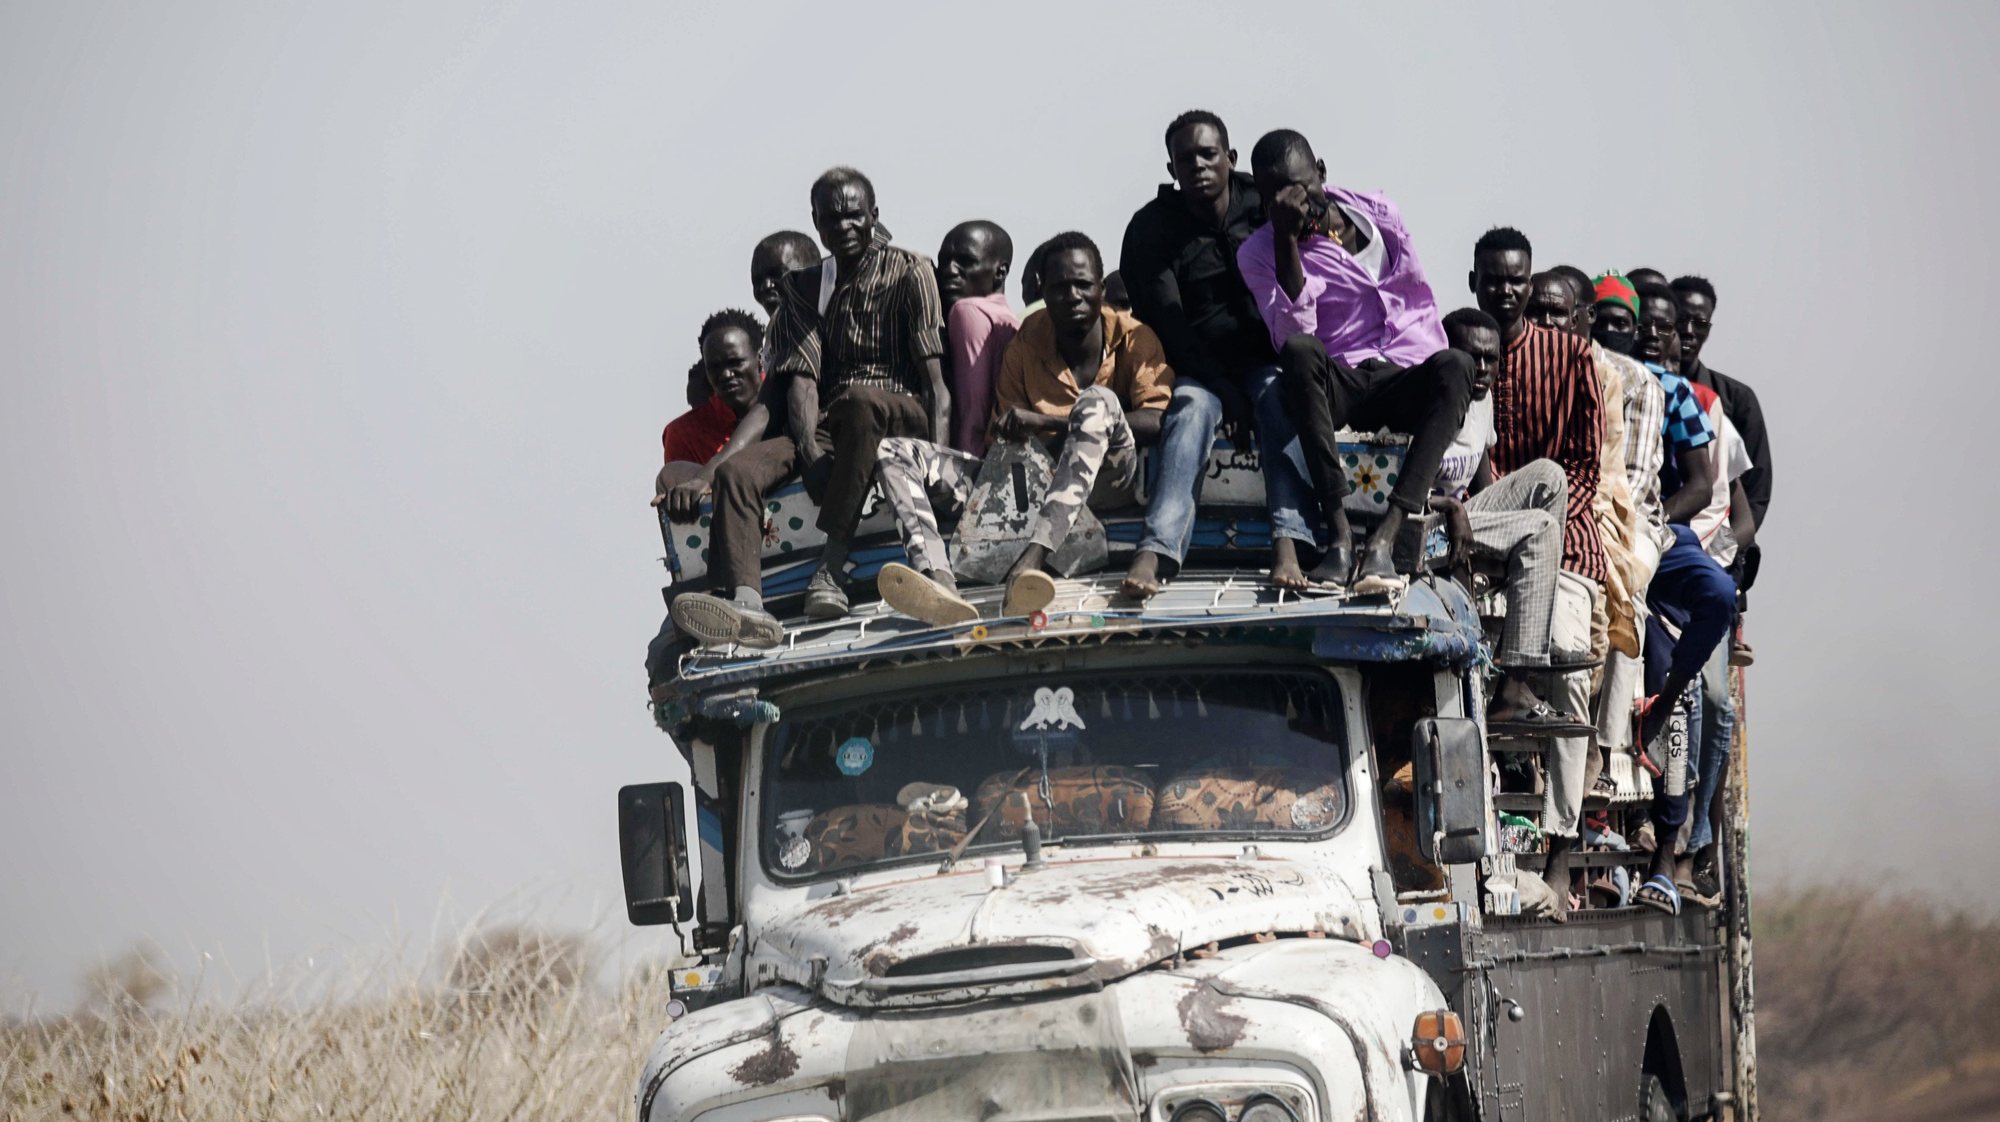 epa11000674 epa10622722 Sudanese refugees and South Sudanese returnees travel atop a truck transporting them from the border towards the Upper Nile State town of Renk, South Sudan, 12 May 2023. Fleeing the armed conflict between the Sudanese military and the RSF (Rapid Support Forces) militia which started last 15 April, some 40 000 people have arrived into South Sudan according to the UNHCR. Most of the refugees are part of the some 800 000 South Sudanese who had fled the war in South Sudan in the first place and they are returning to a country which is barely out of conflict itself with tensions still remaining in many areas and more than 2 million internally displaced people. The scarcity of food and water and the military escalation had made the stay of most civilians impossible in Sudan. Upon arriving at Joda border crossing the refugees head to a transit area set up by the UNHCR in the small town of Renk, where various UN agencies assist them with registration, food, health check and logistics to either leave Renk which is not equipped to house a large refugee population.  EPA/AMEL PAIN  EPA-EFE/AMEL PAIN